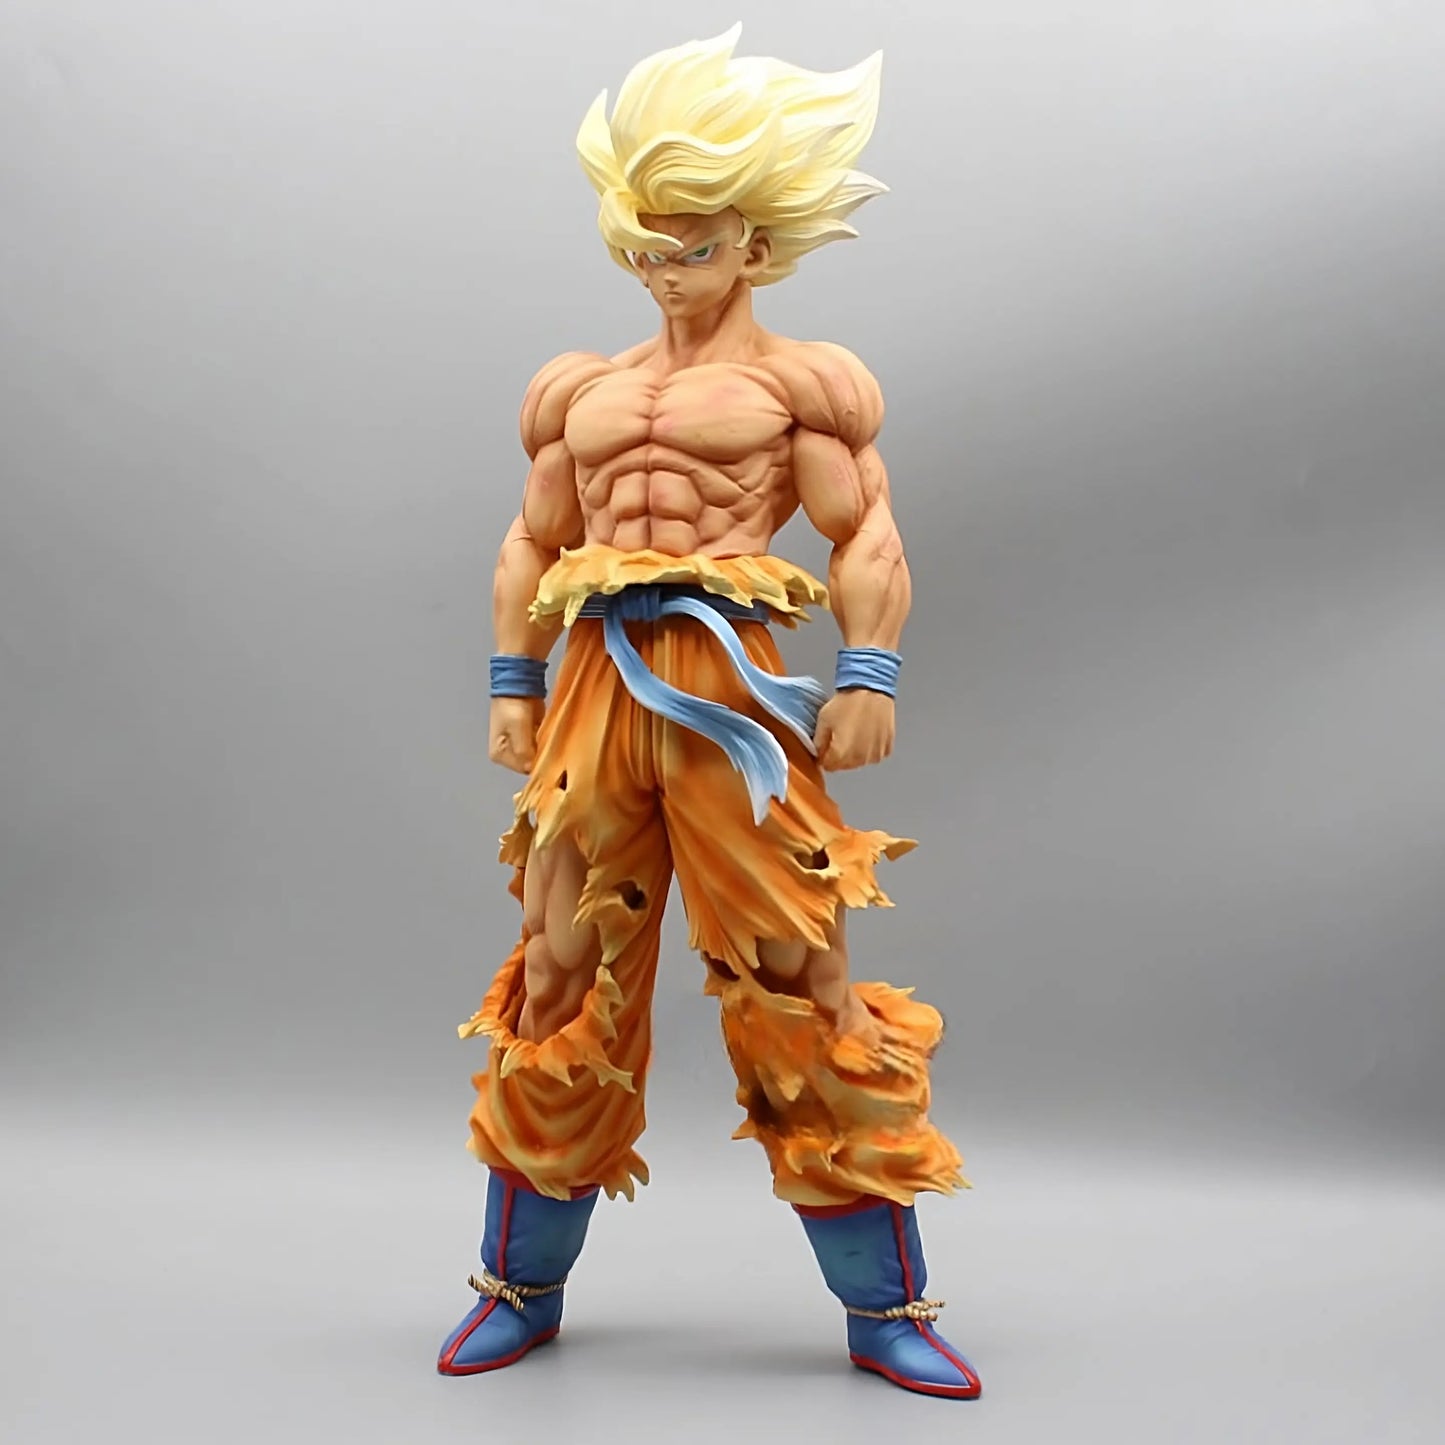 The 'Ascend to Saiyan Glory Goku' Dragon Ball collectible features a formidable Goku in Super Saiyan form, with his hair in the iconic golden spikes. He is captured in a strong stance, wearing a tattered orange gi over blue pants and red boots, highlighting his rippling muscles and the intense energy of his transformation, all against a simple gray backdrop.